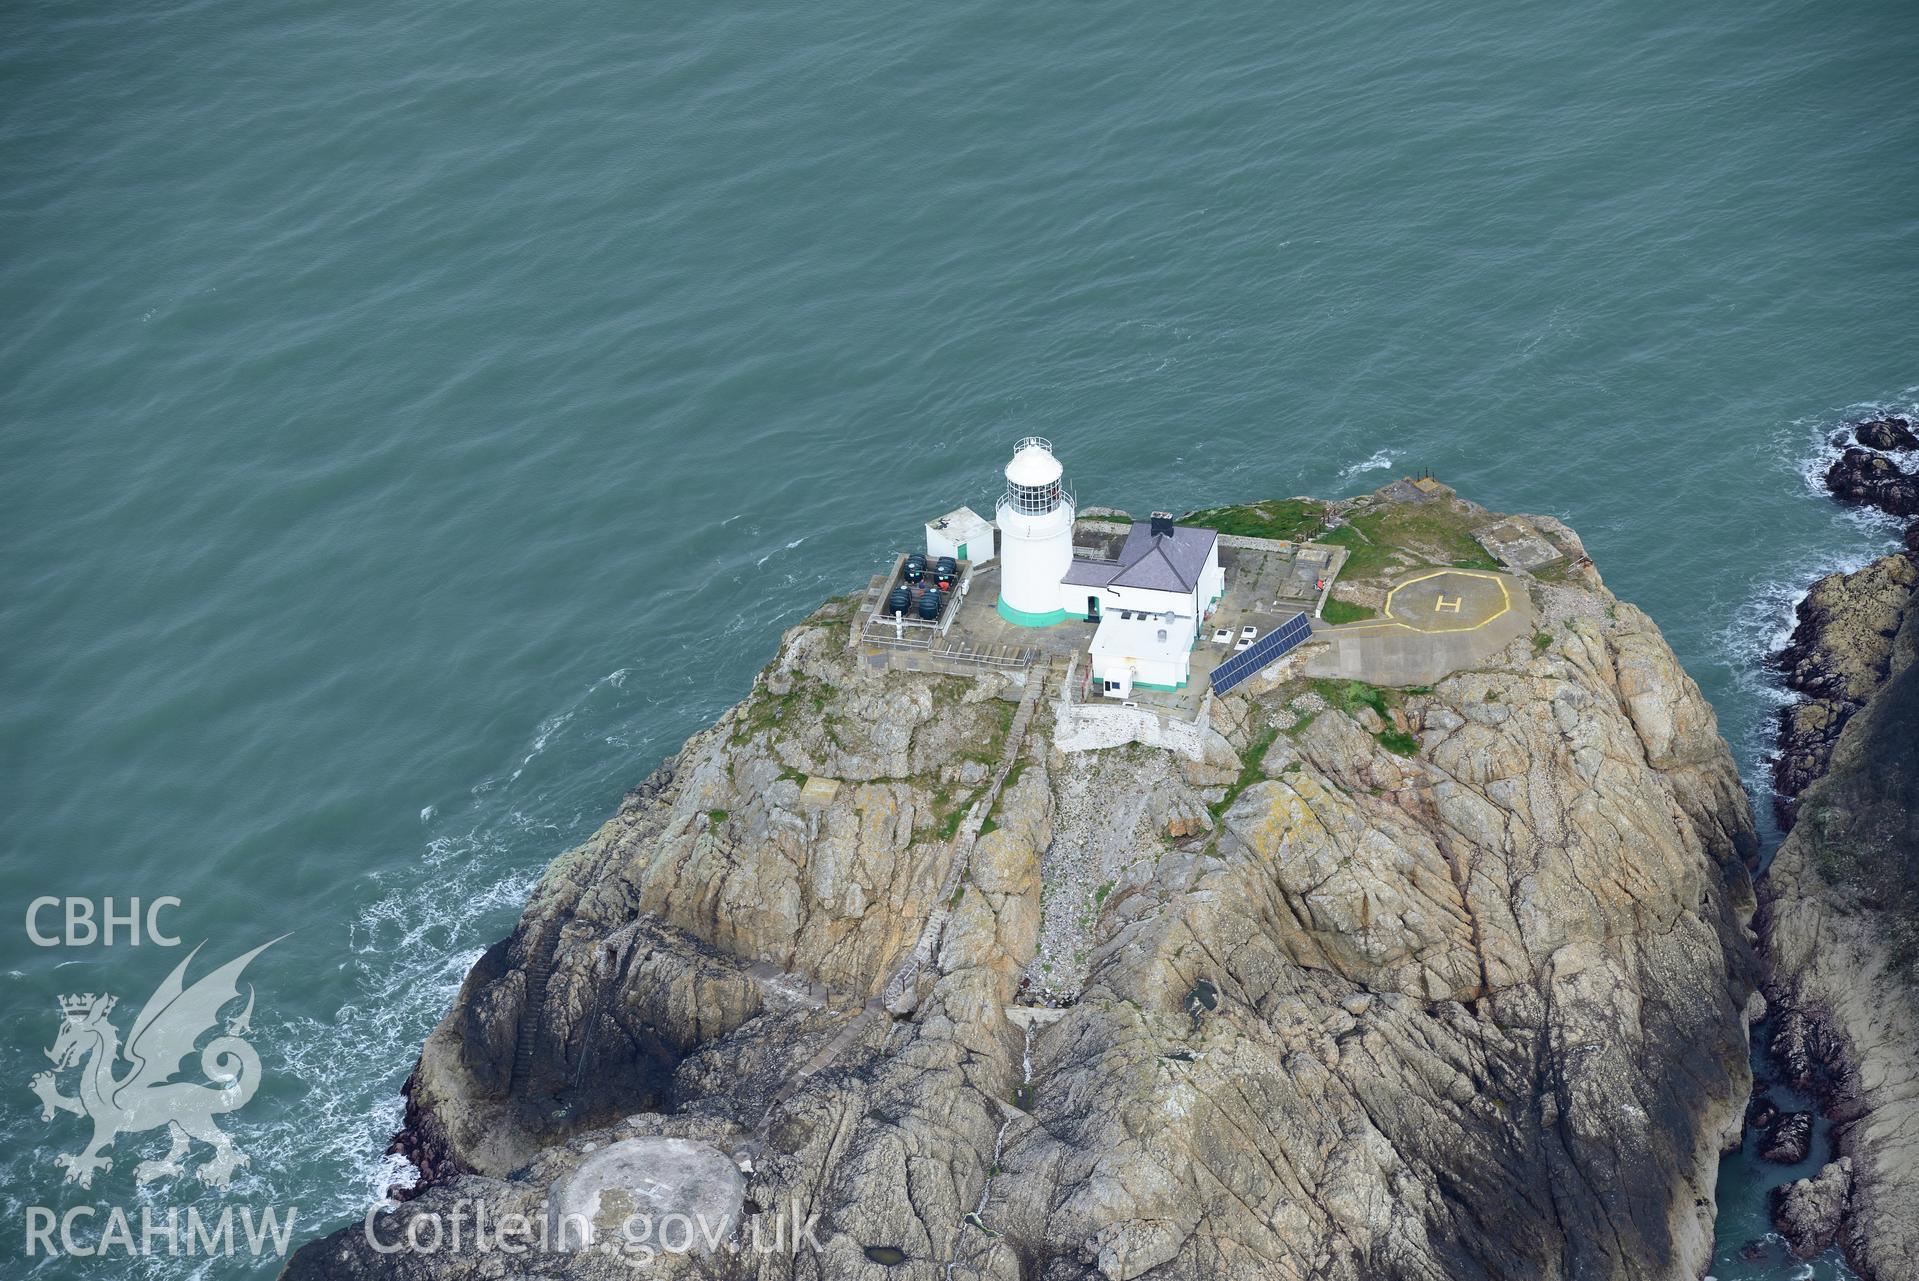 South Bishop Lighthouse at extreme low tide. Baseline aerial reconnaissance survey for the CHERISH Project. ? Crown: CHERISH PROJECT 2017. Produced with EU funds through the Ireland Wales Co-operation Programme 2014-2020. All material made freely available through the Open Government Licence.